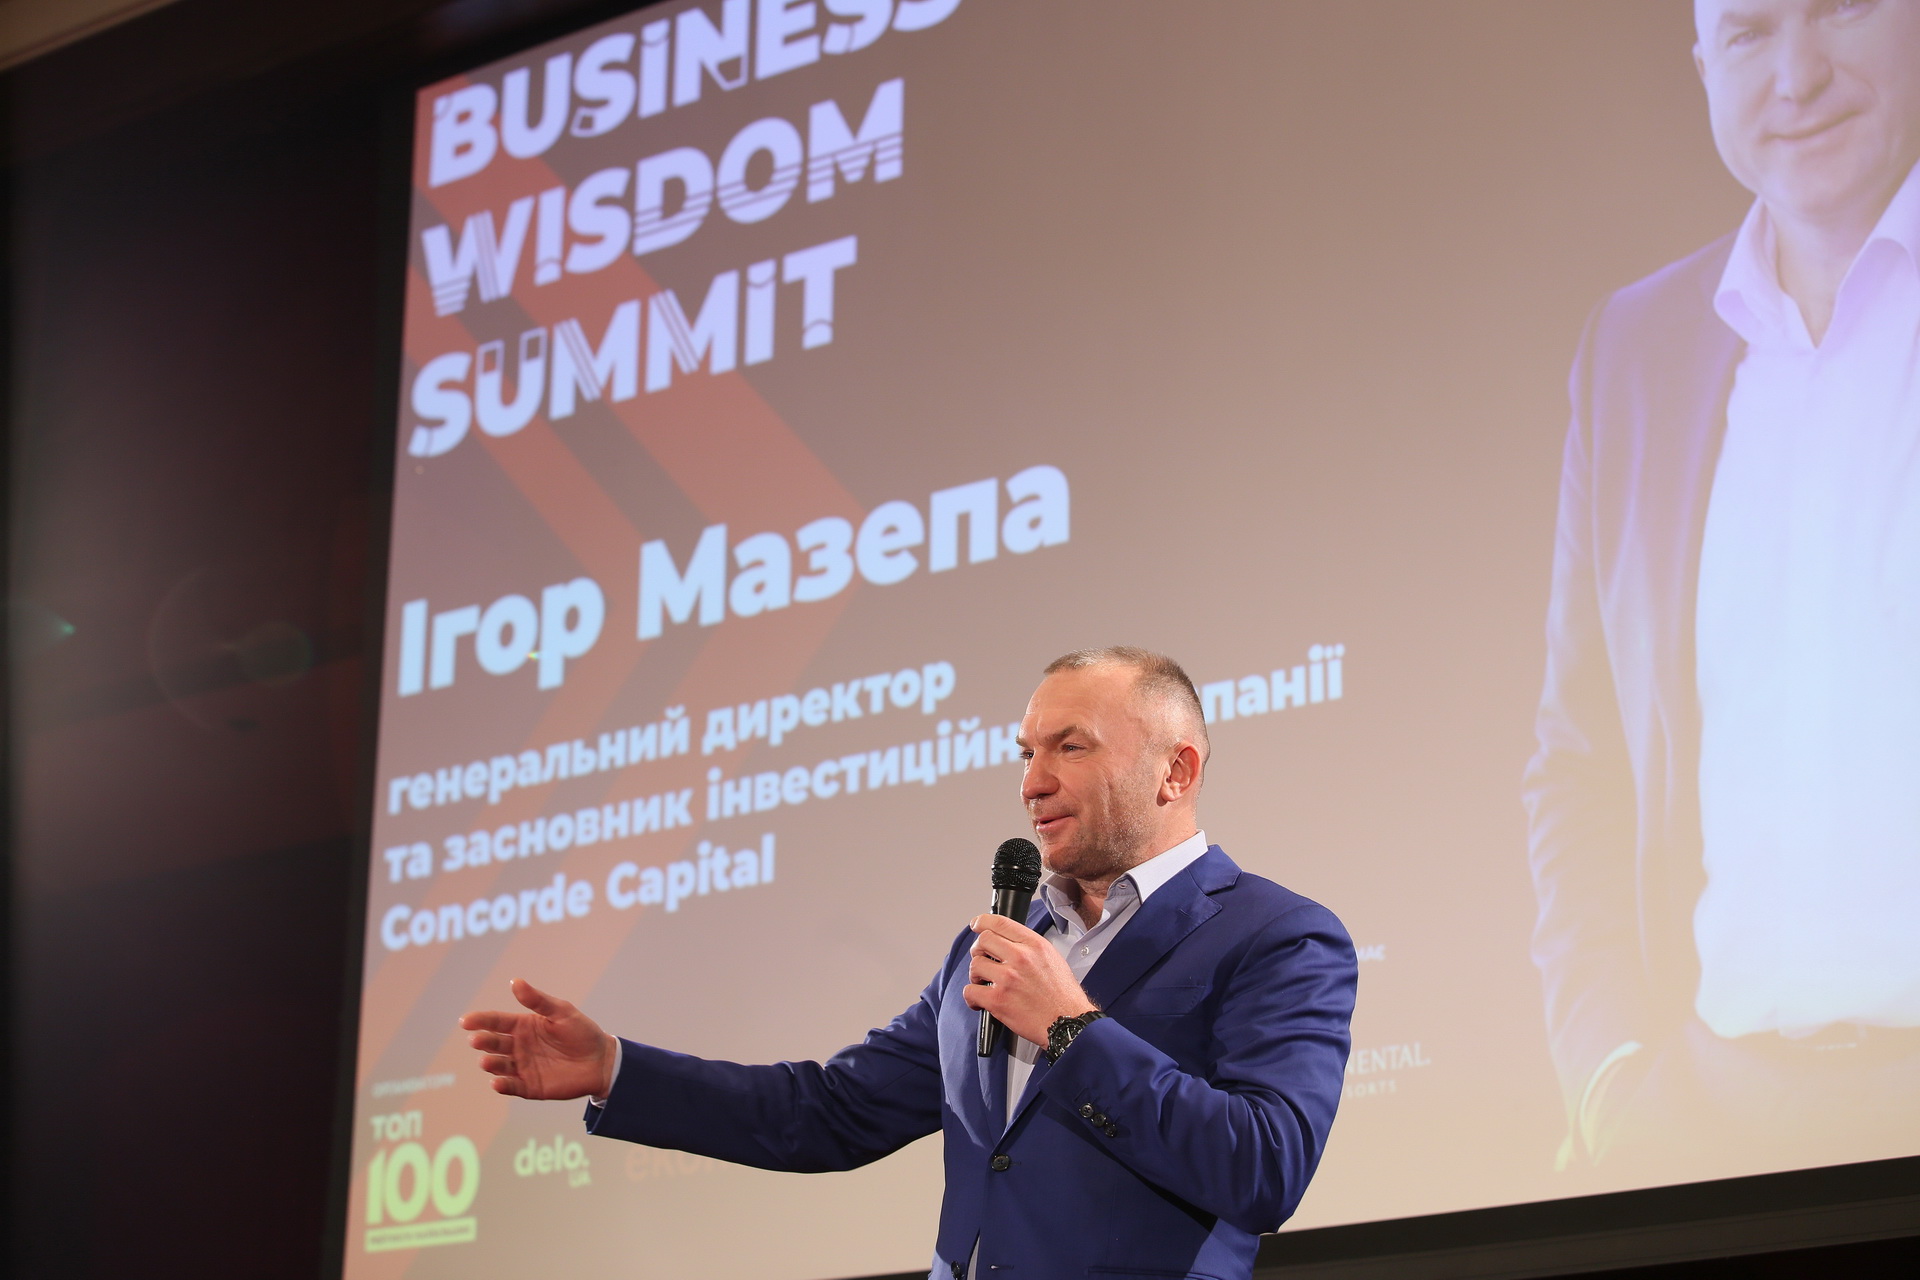 Business rules from Igor Mazepa 